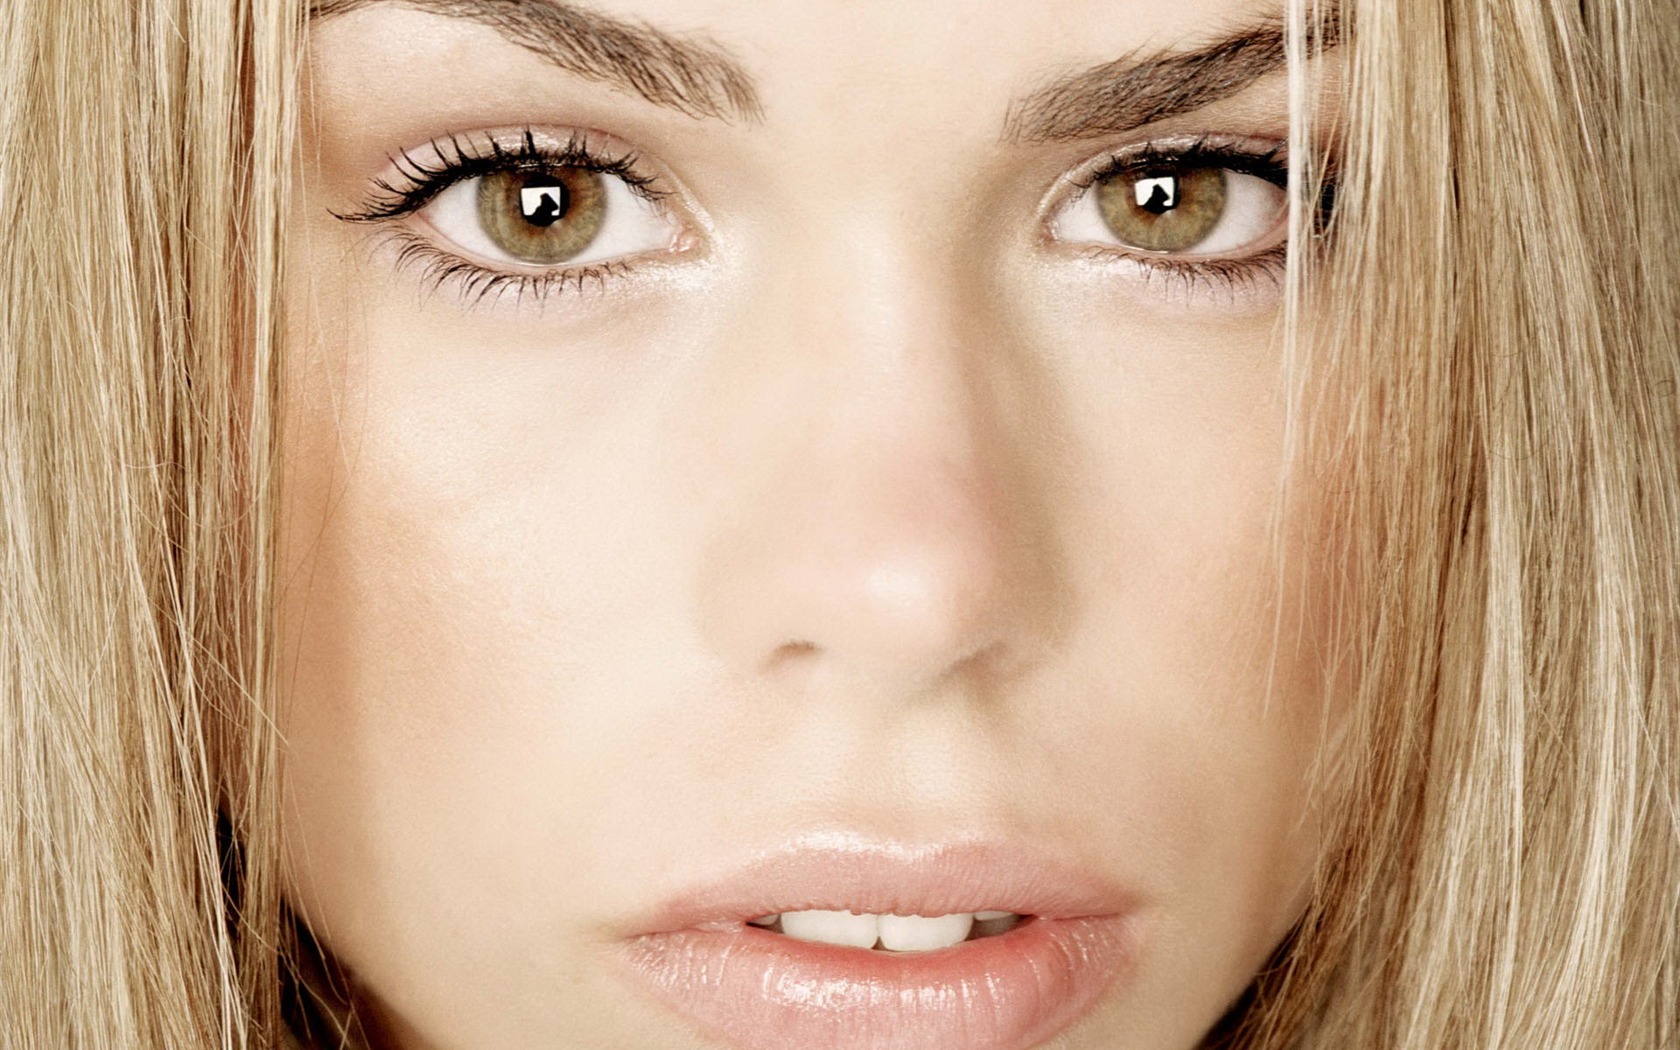 Billie Piper #015 - 1680x1050 Wallpapers Pictures Photos Images